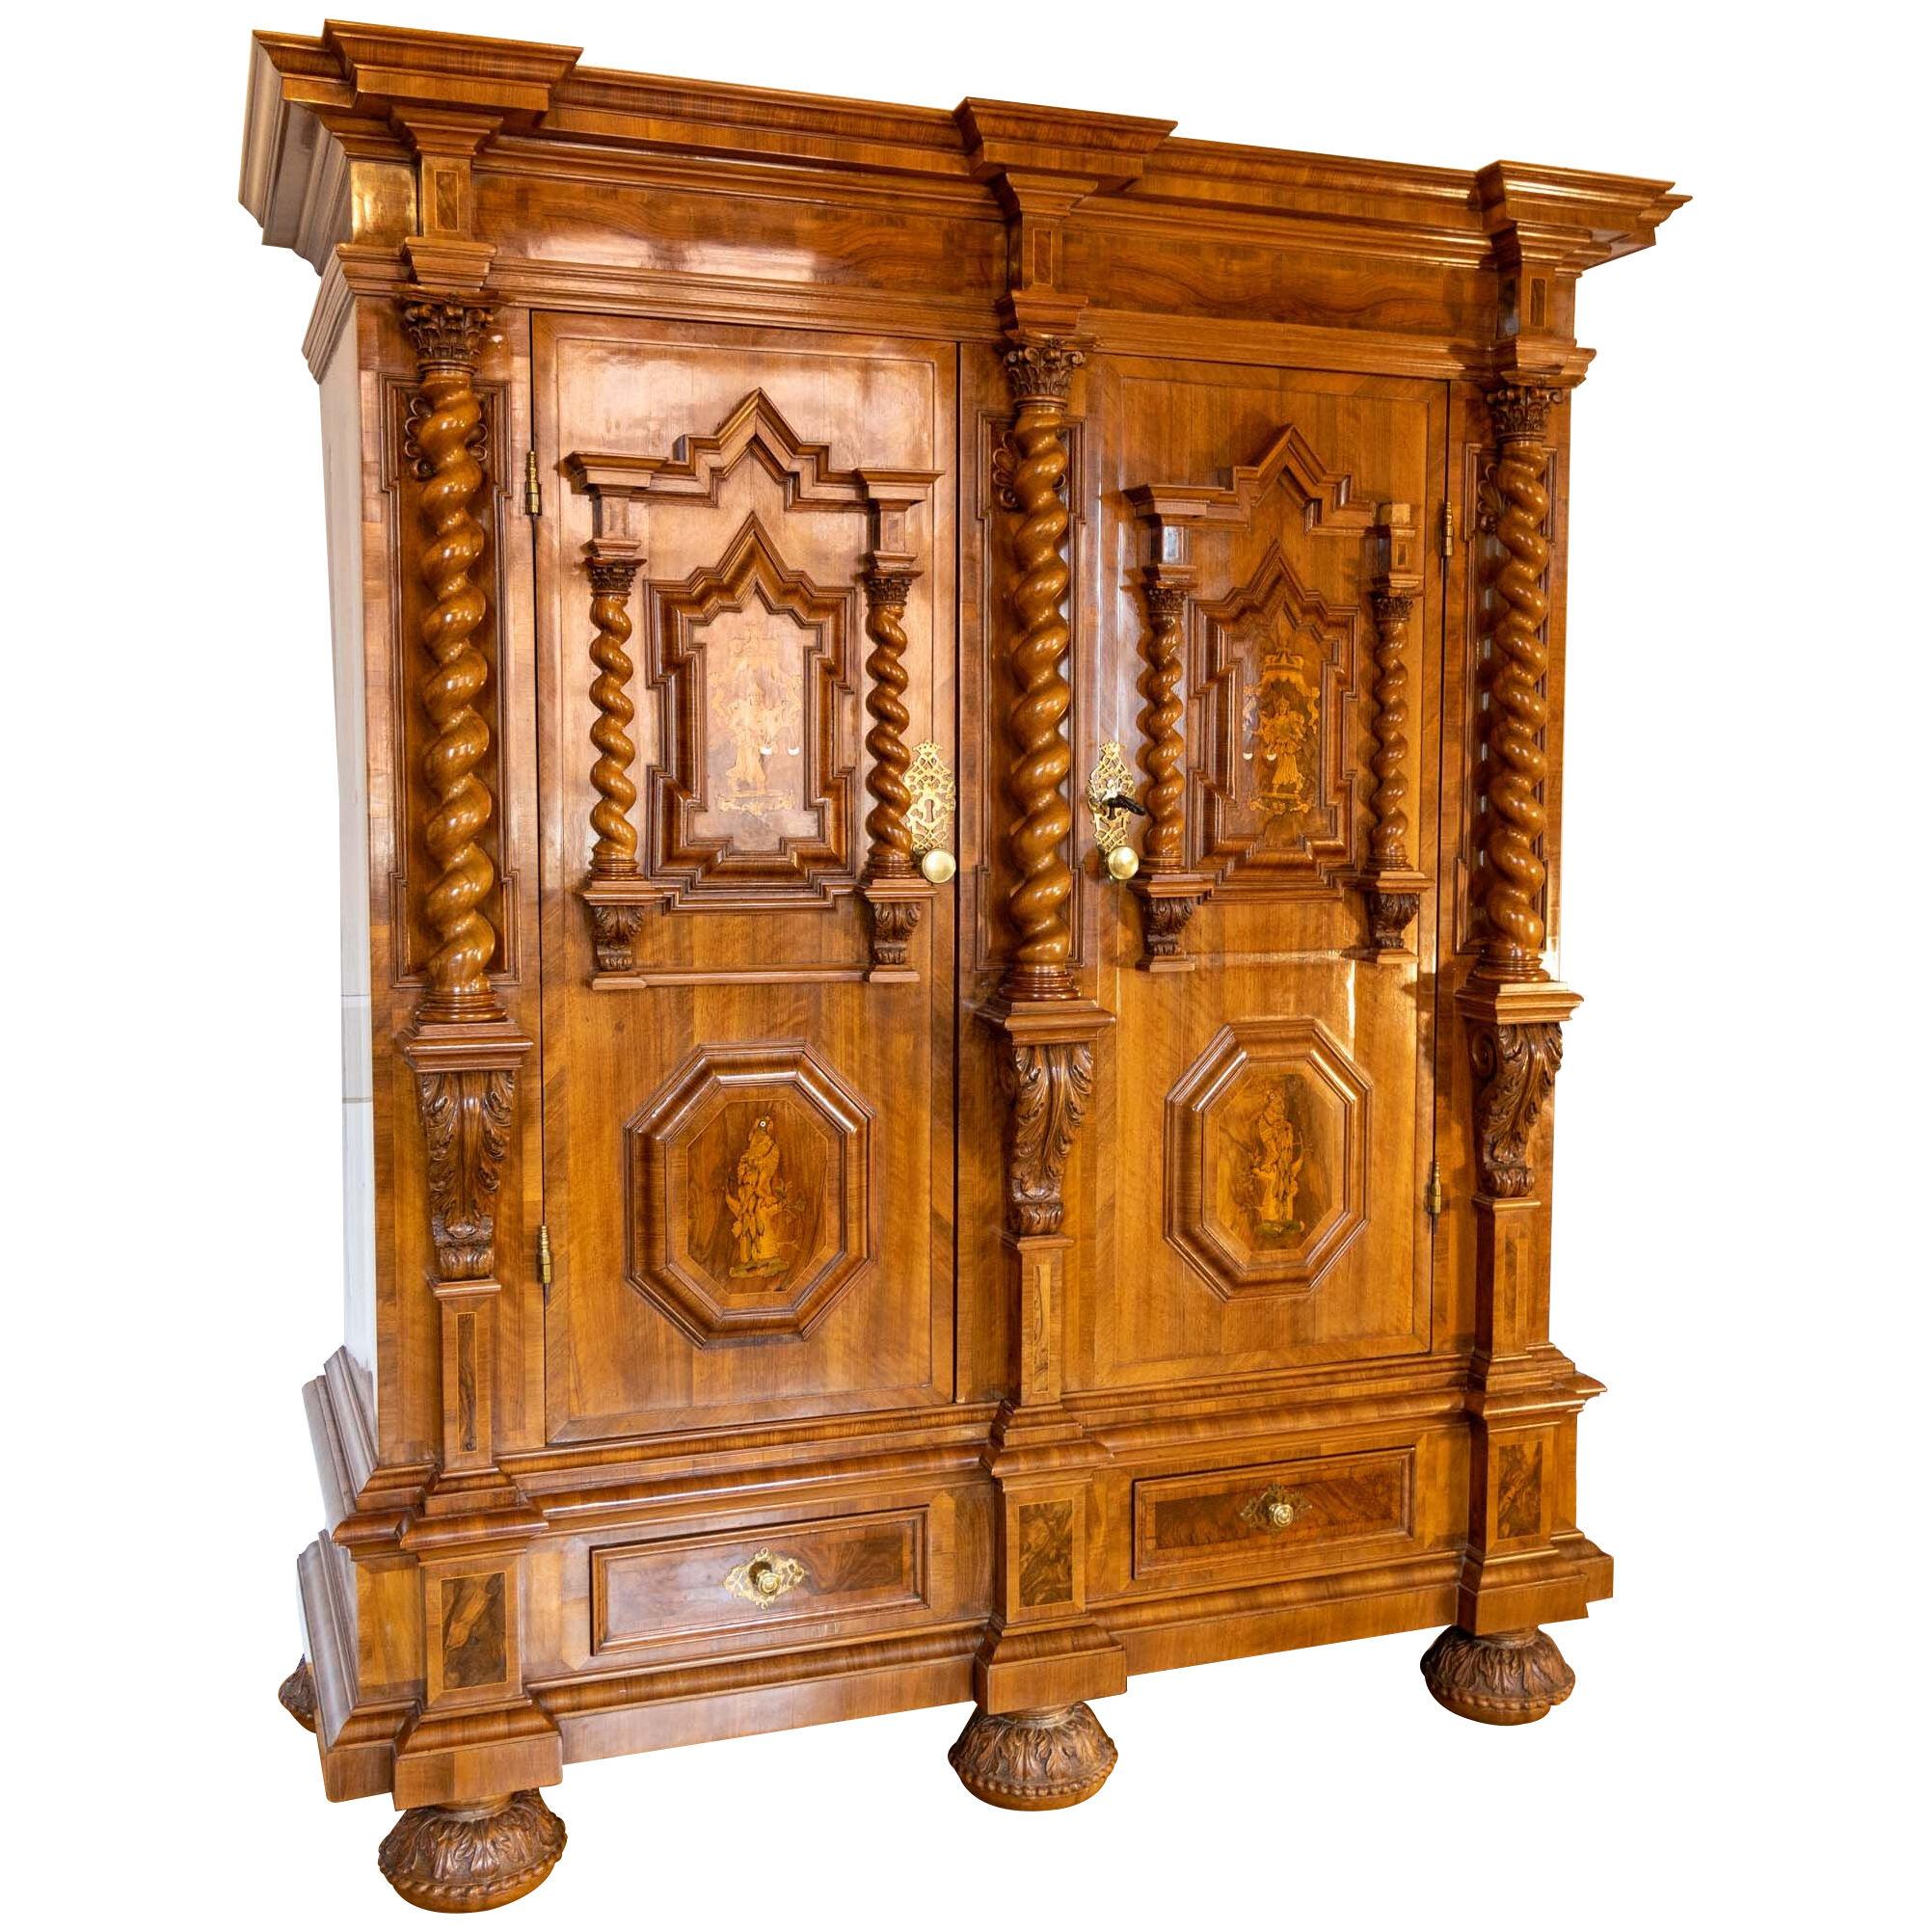 Baroque Cabinet, South Germany, 17th Century